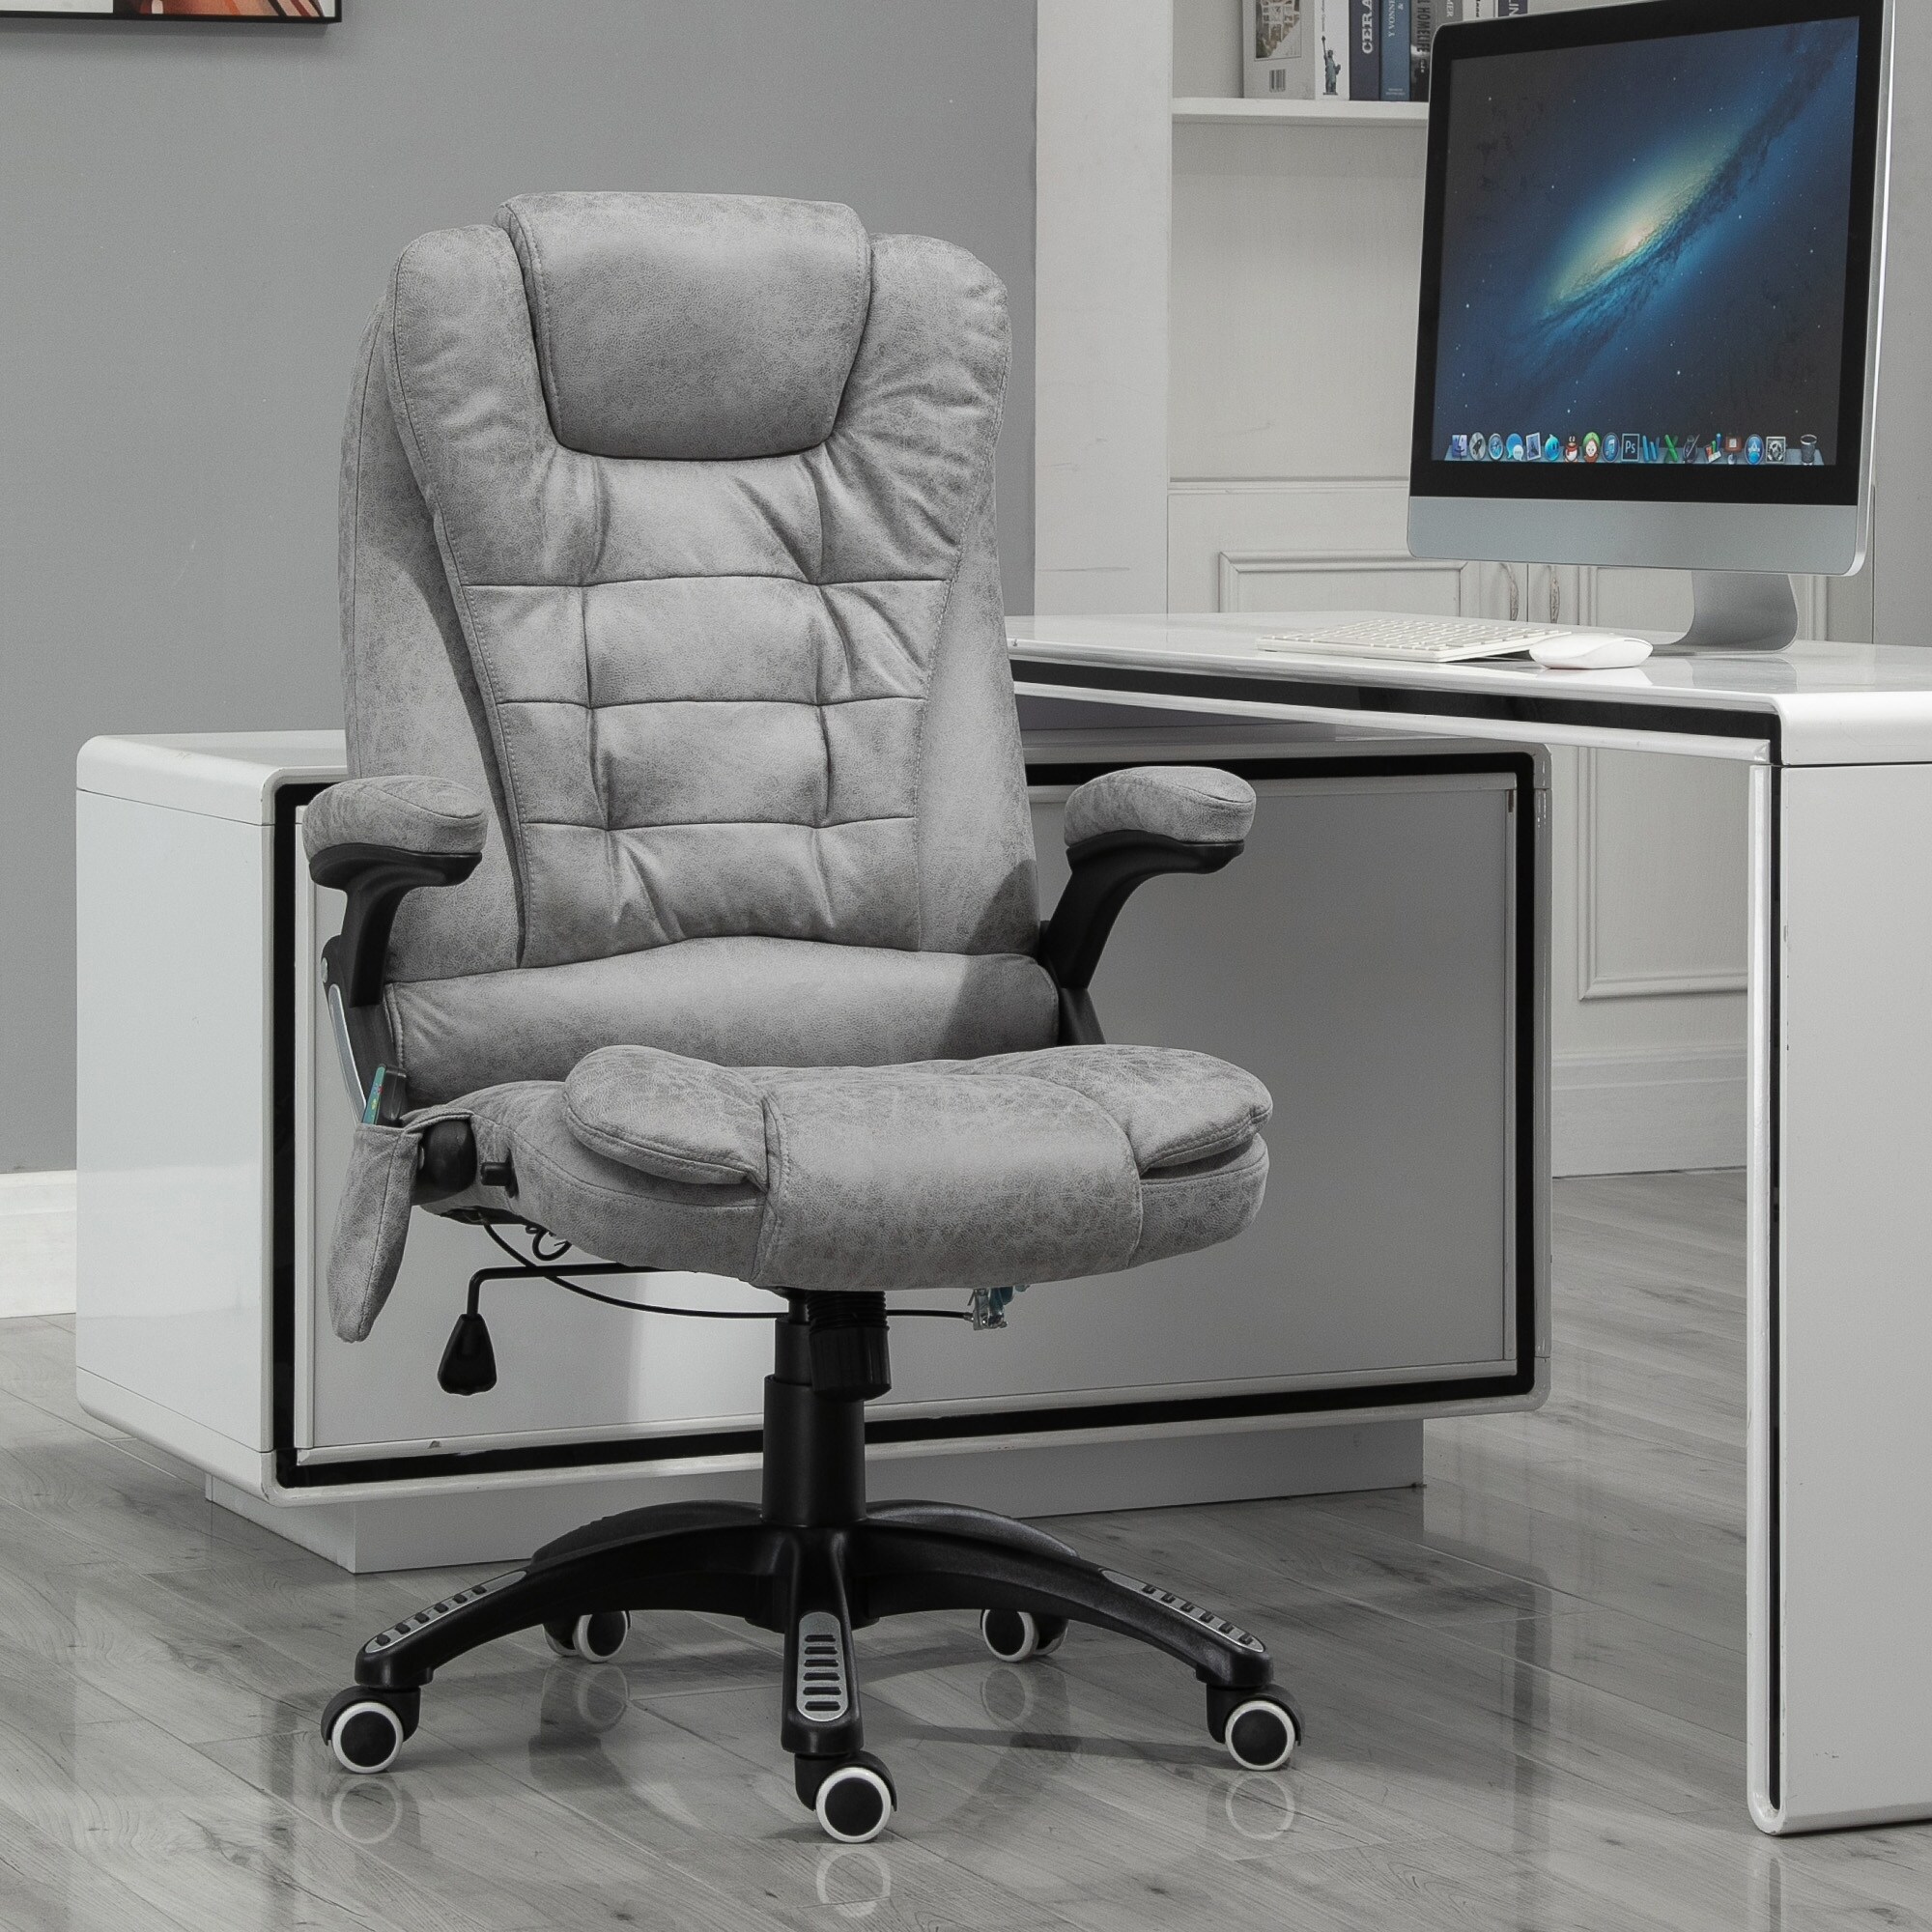 https://ak1.ostkcdn.com/images/products/is/images/direct/1d7d28aa01eb9bf913f569908c0bb06b23be874e/Vinsetto-Ergonomic-Vibrating-Executive-Massage-Office-Chair%2C-with-Wheels%2C-Adjustable-Height%2C-Leatheraire-Fabric.jpg